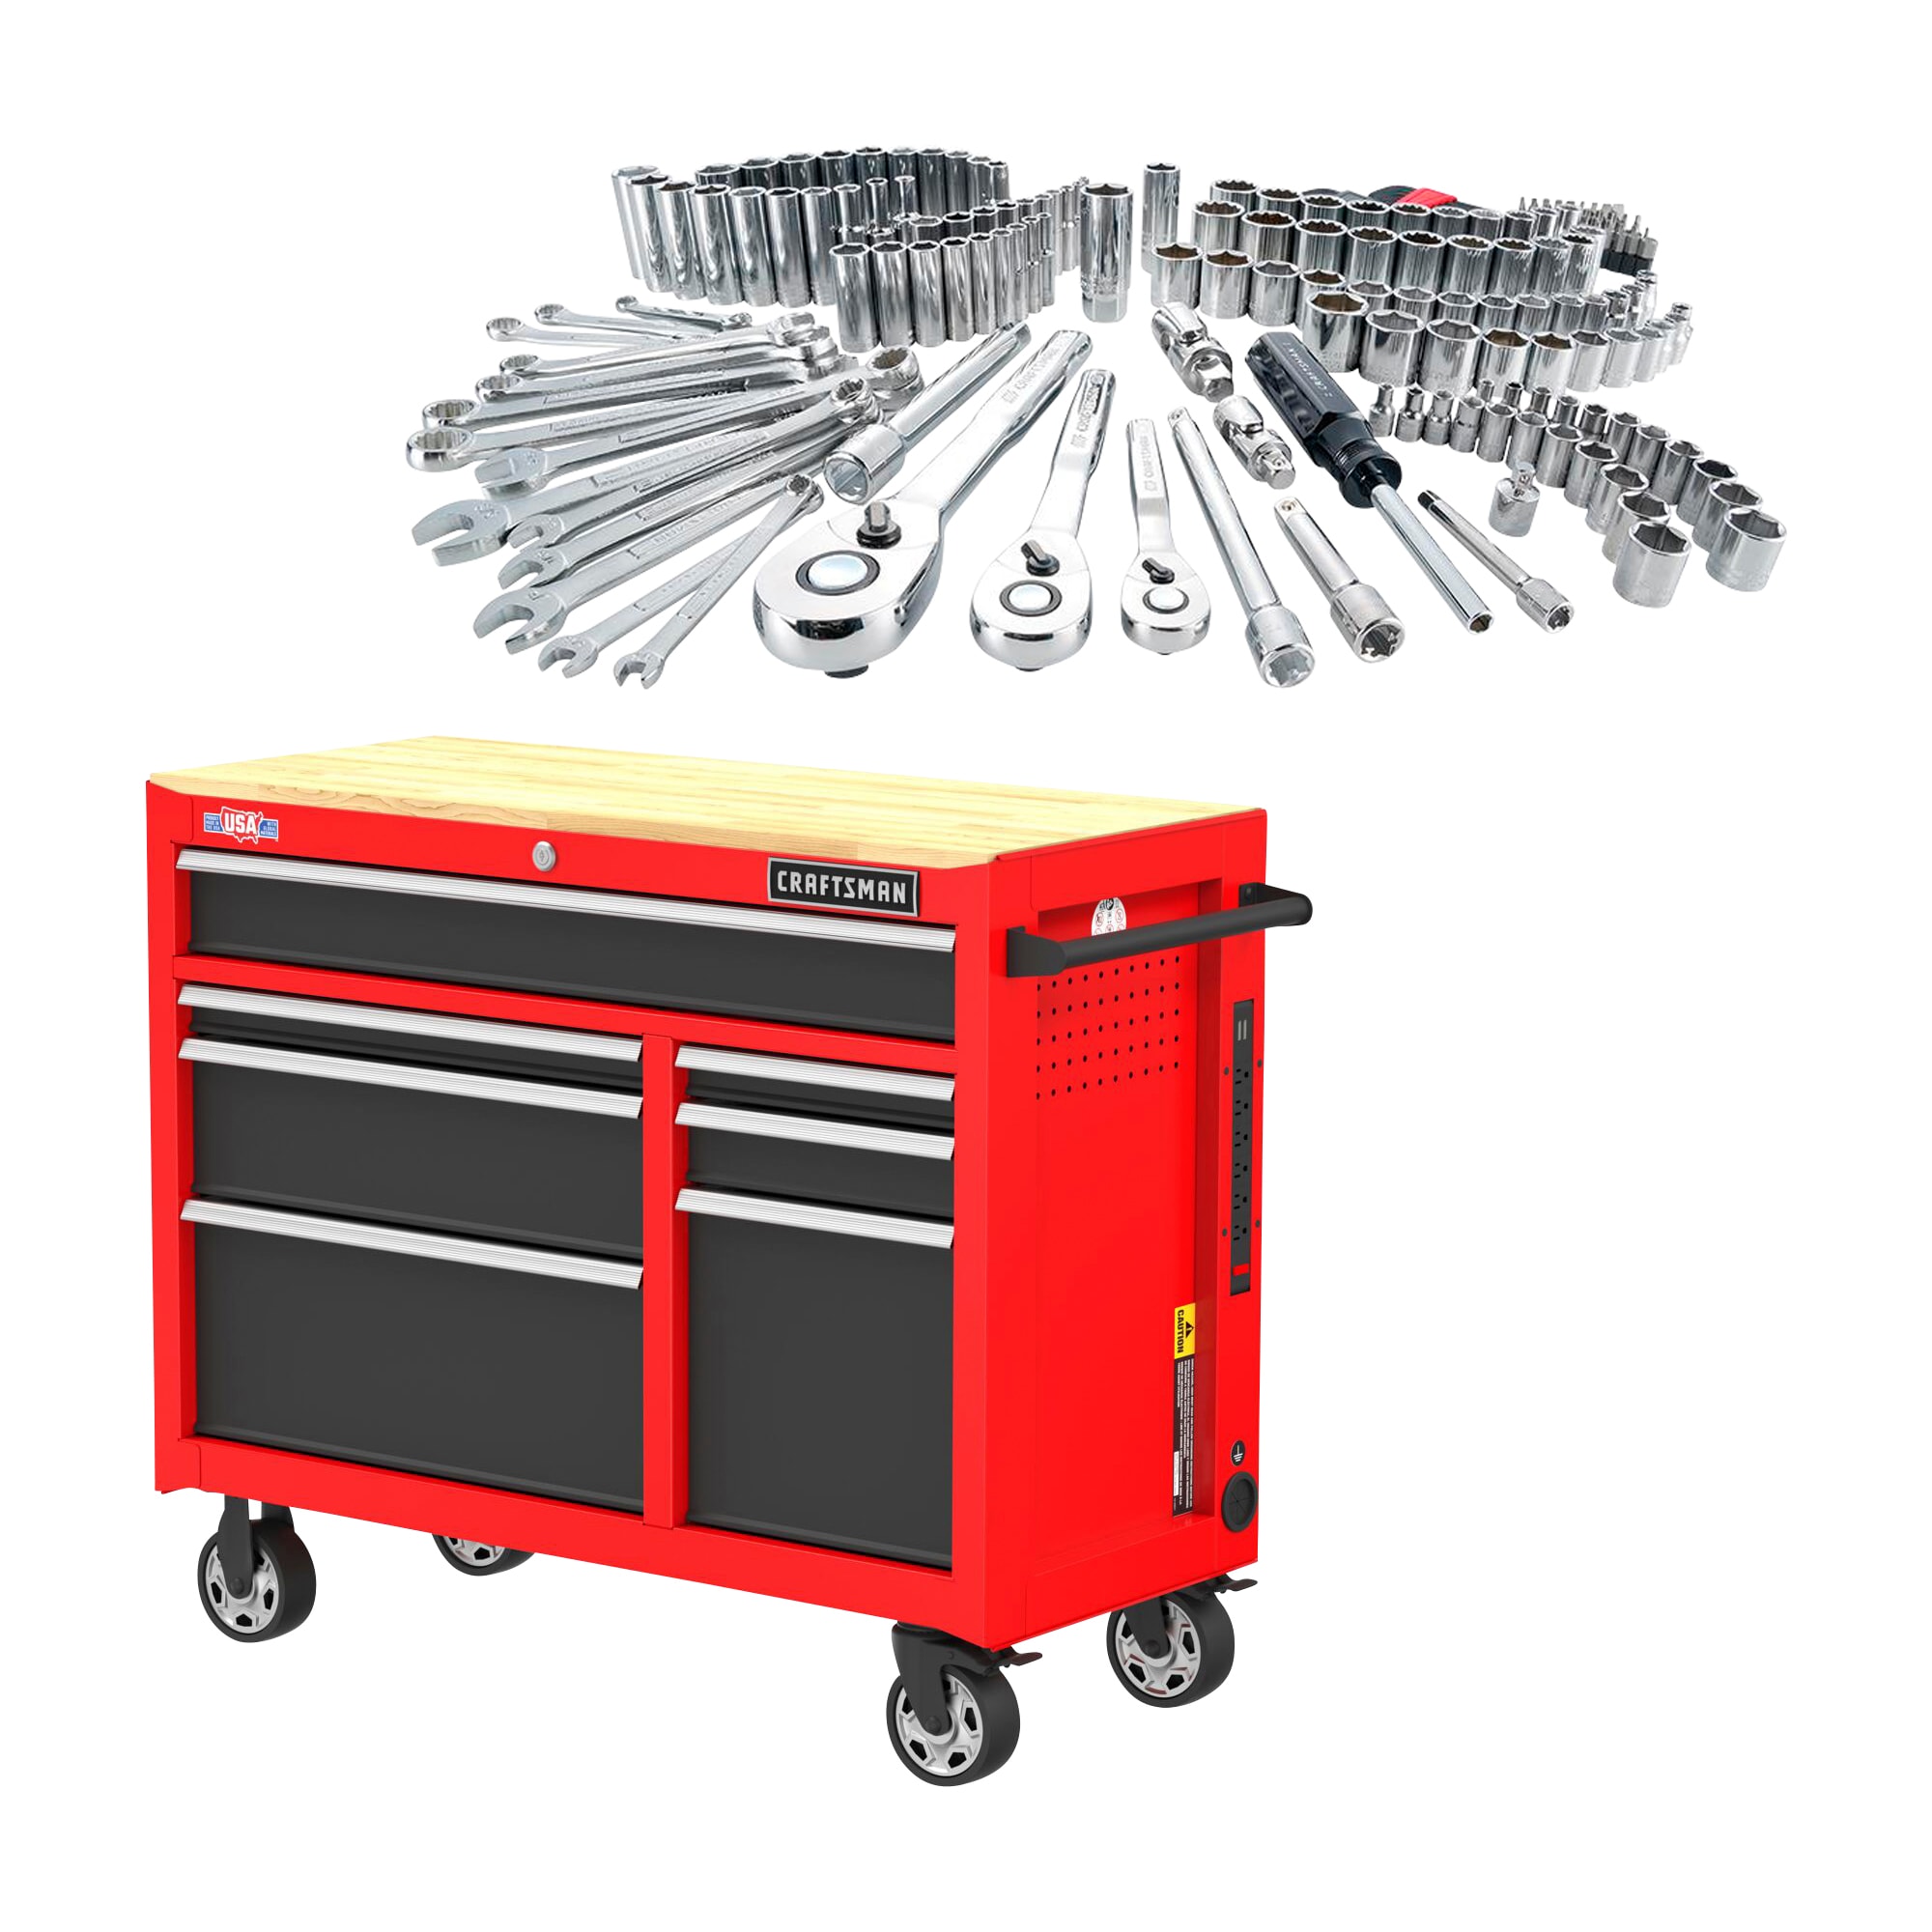 CRAFTSMAN 2000 Series 41-in W x 34-in H 7-Drawer Steel Rolling Tool Cabinet (Red) & 189-Piece Standard (SAE) and Metric Combination Polished Chrome